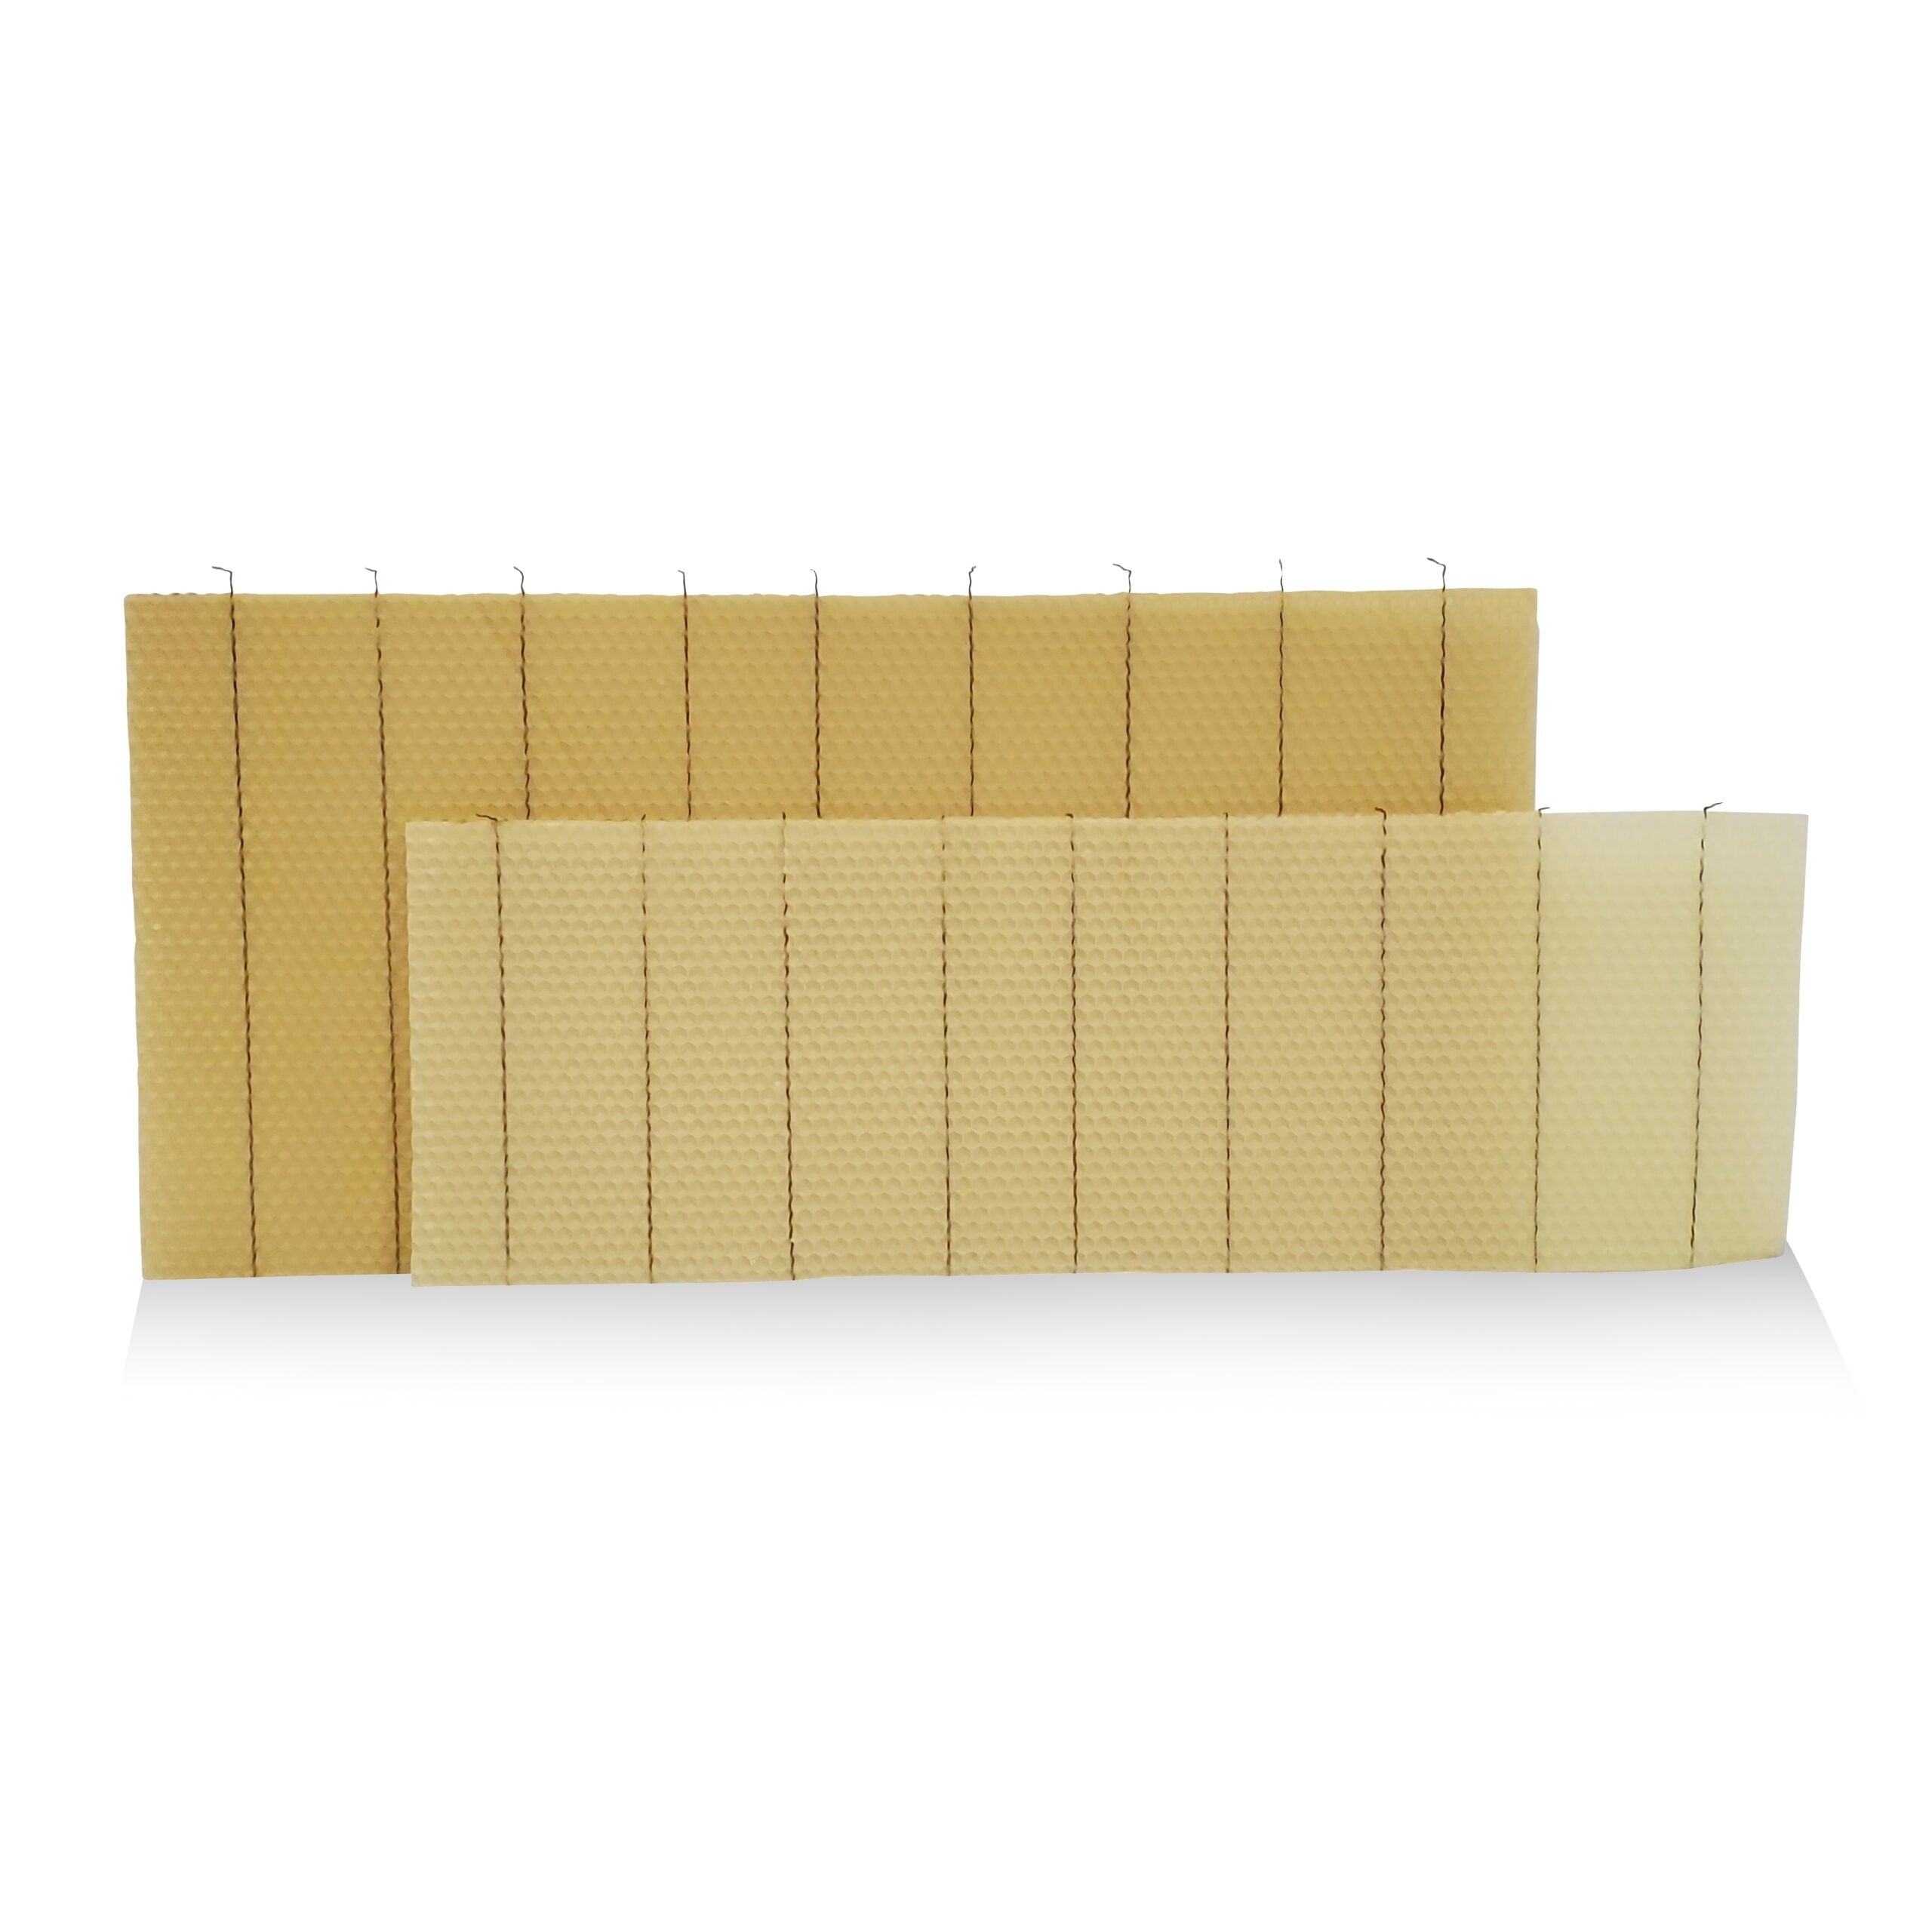 100% Beeswax Foundation - Crimp-Wired